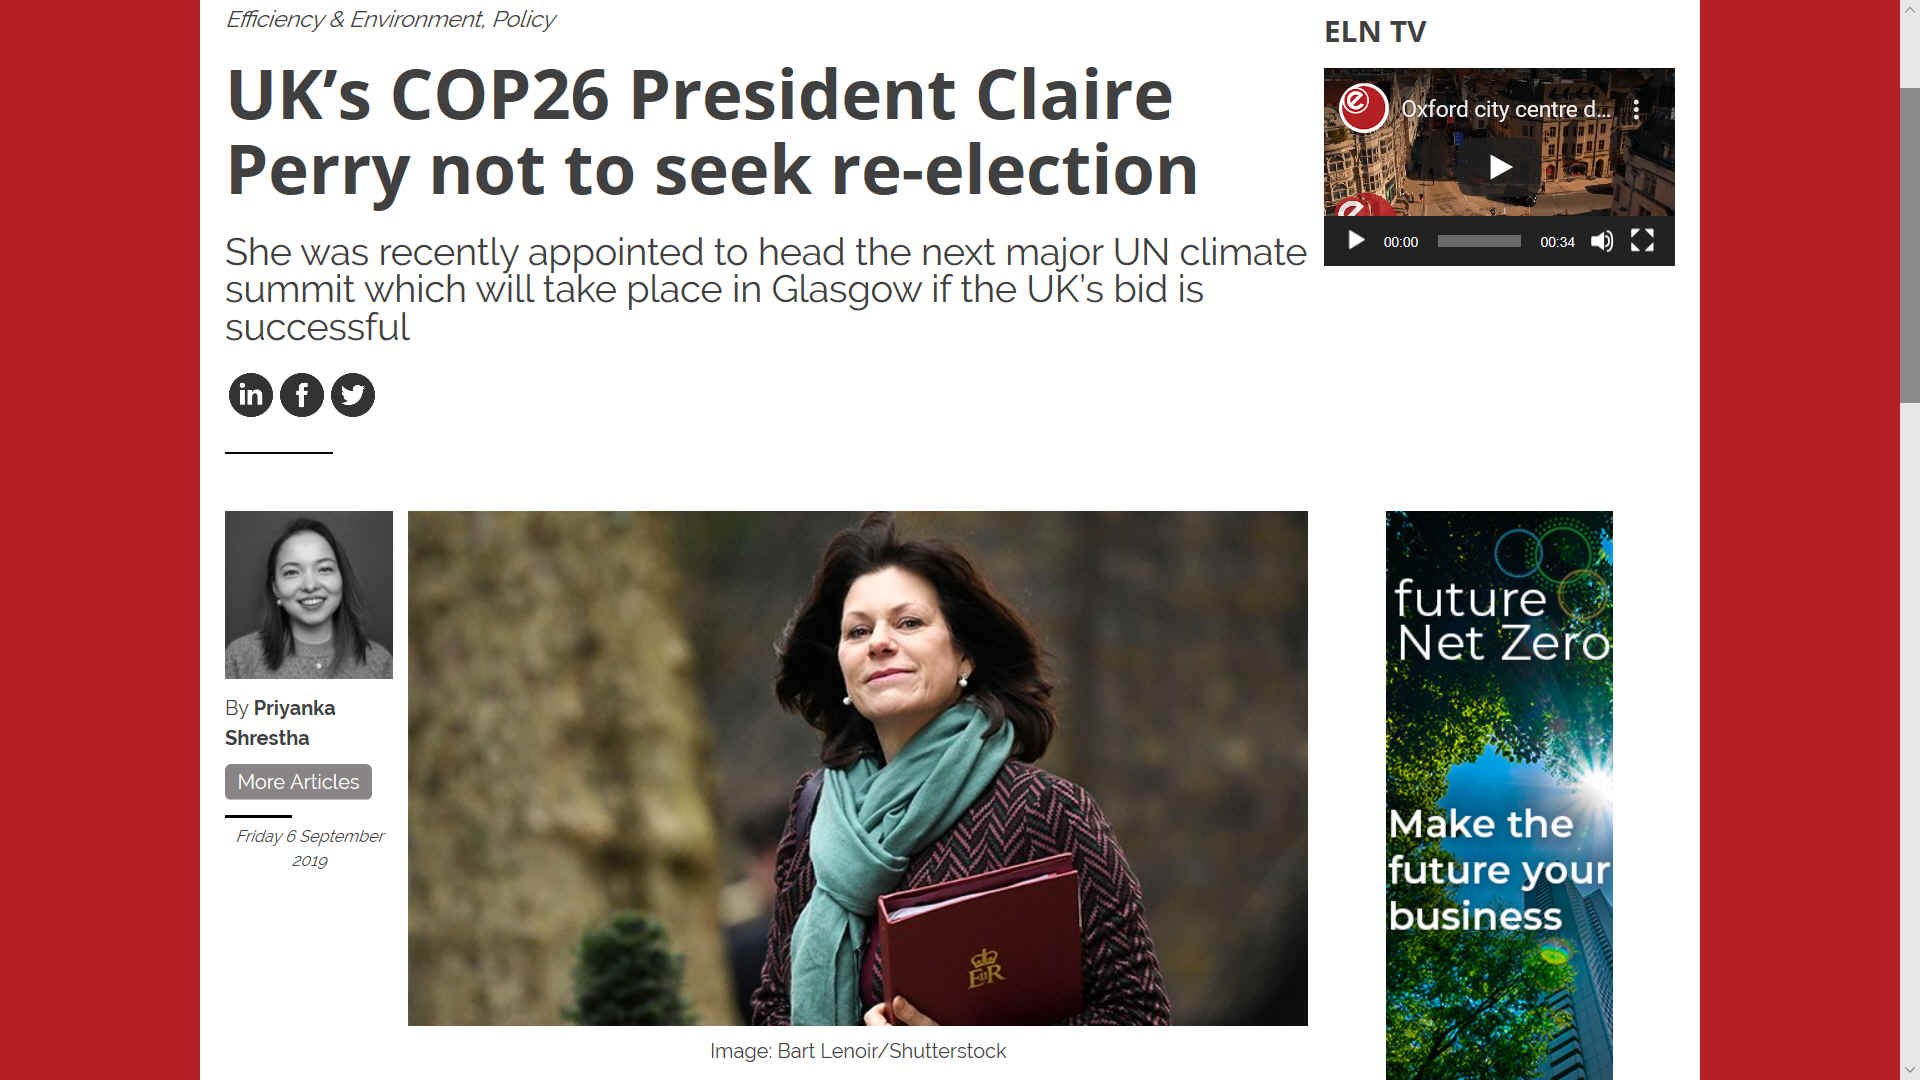 Claire Perry was replaced as President for COP 26